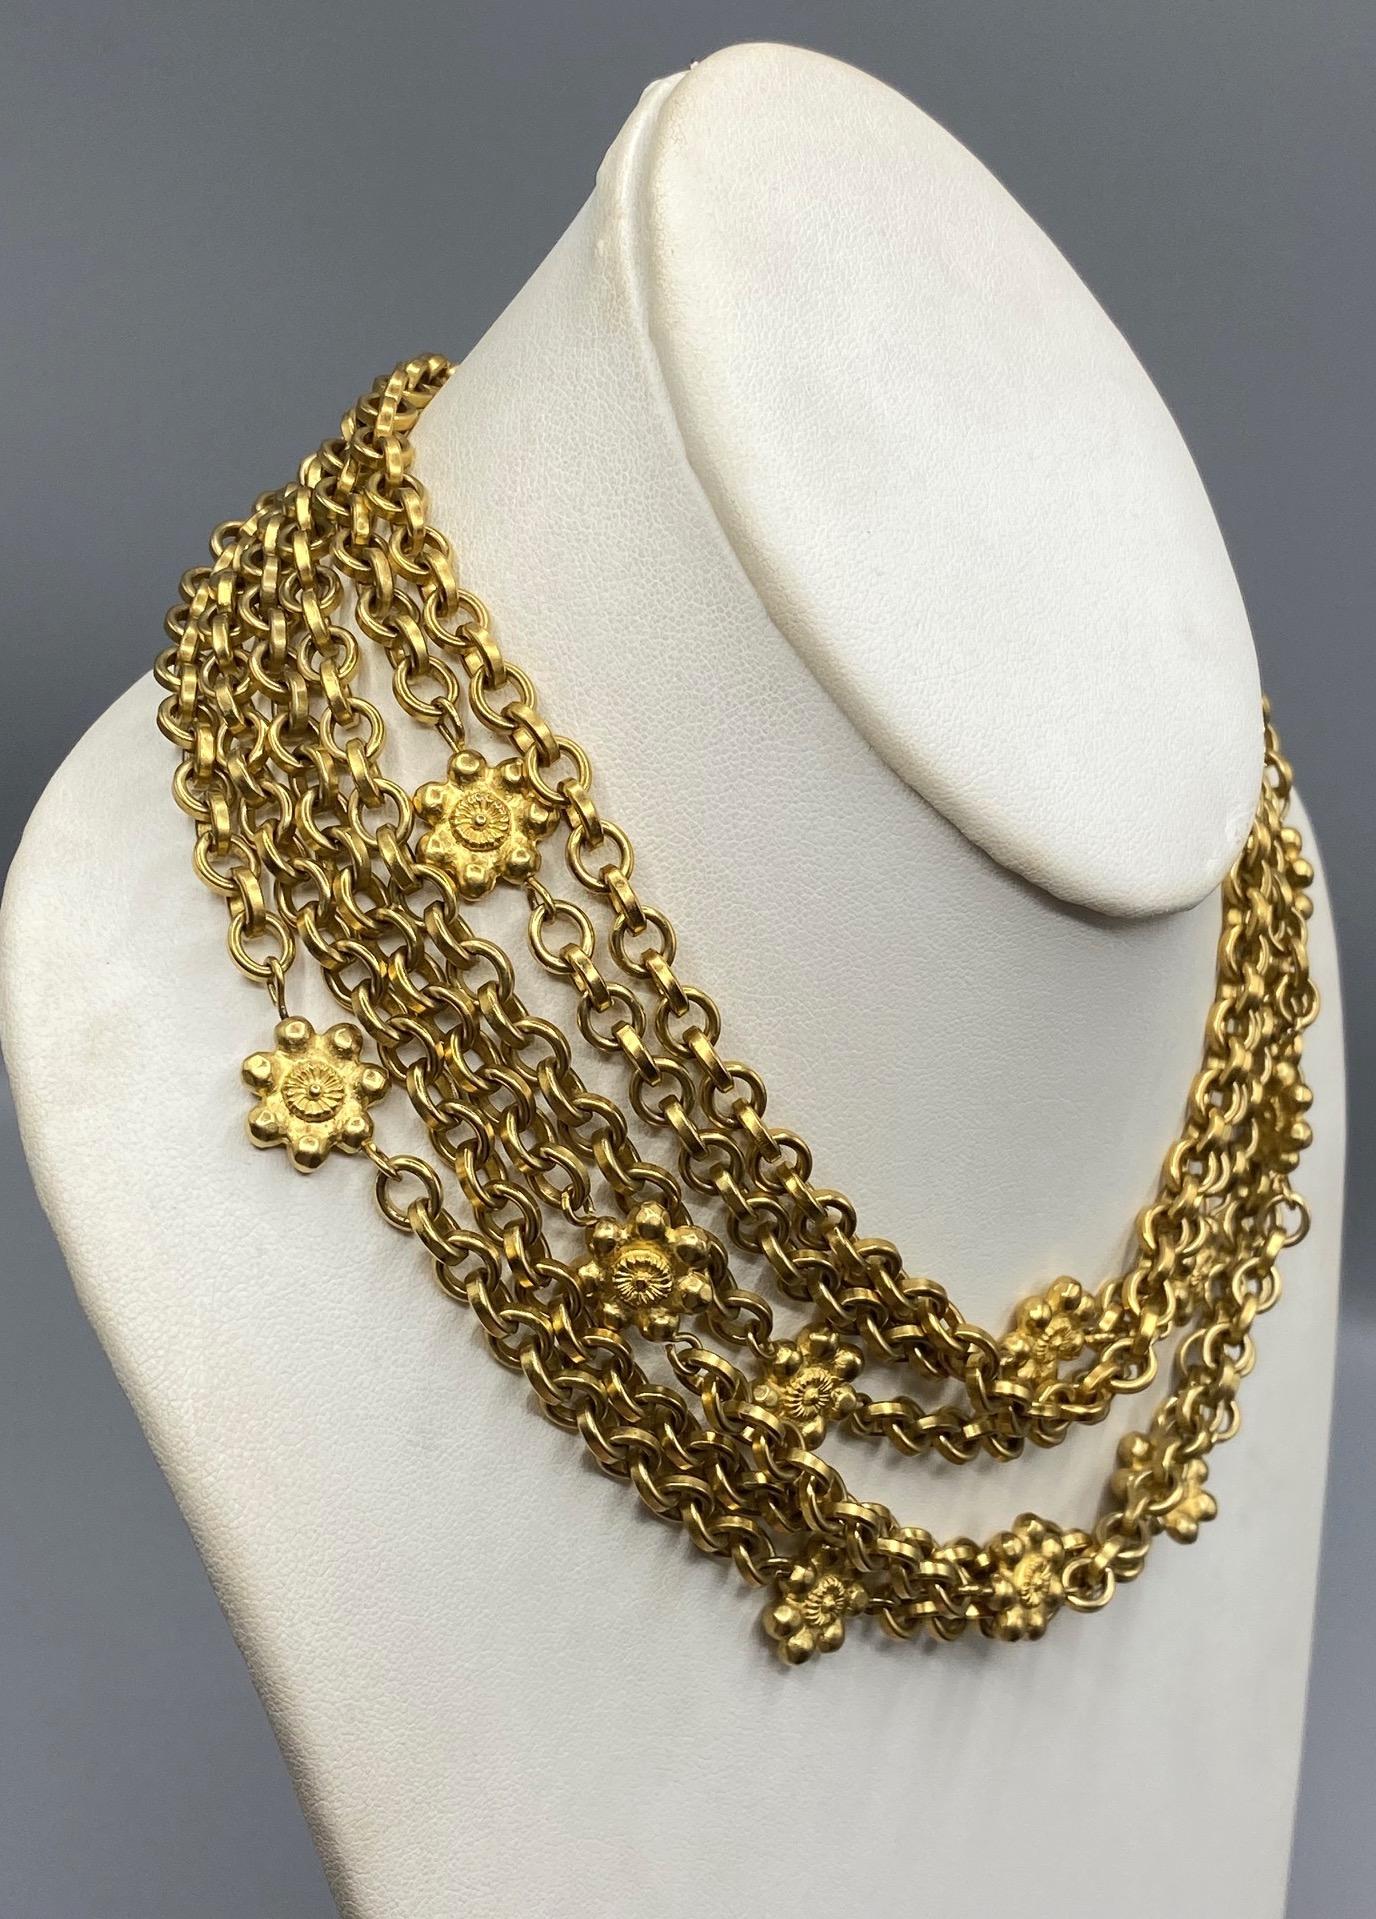 Women's or Men's Karl Lagerfeld 1980s Six Strand Gold Toggle Necklace For Sale